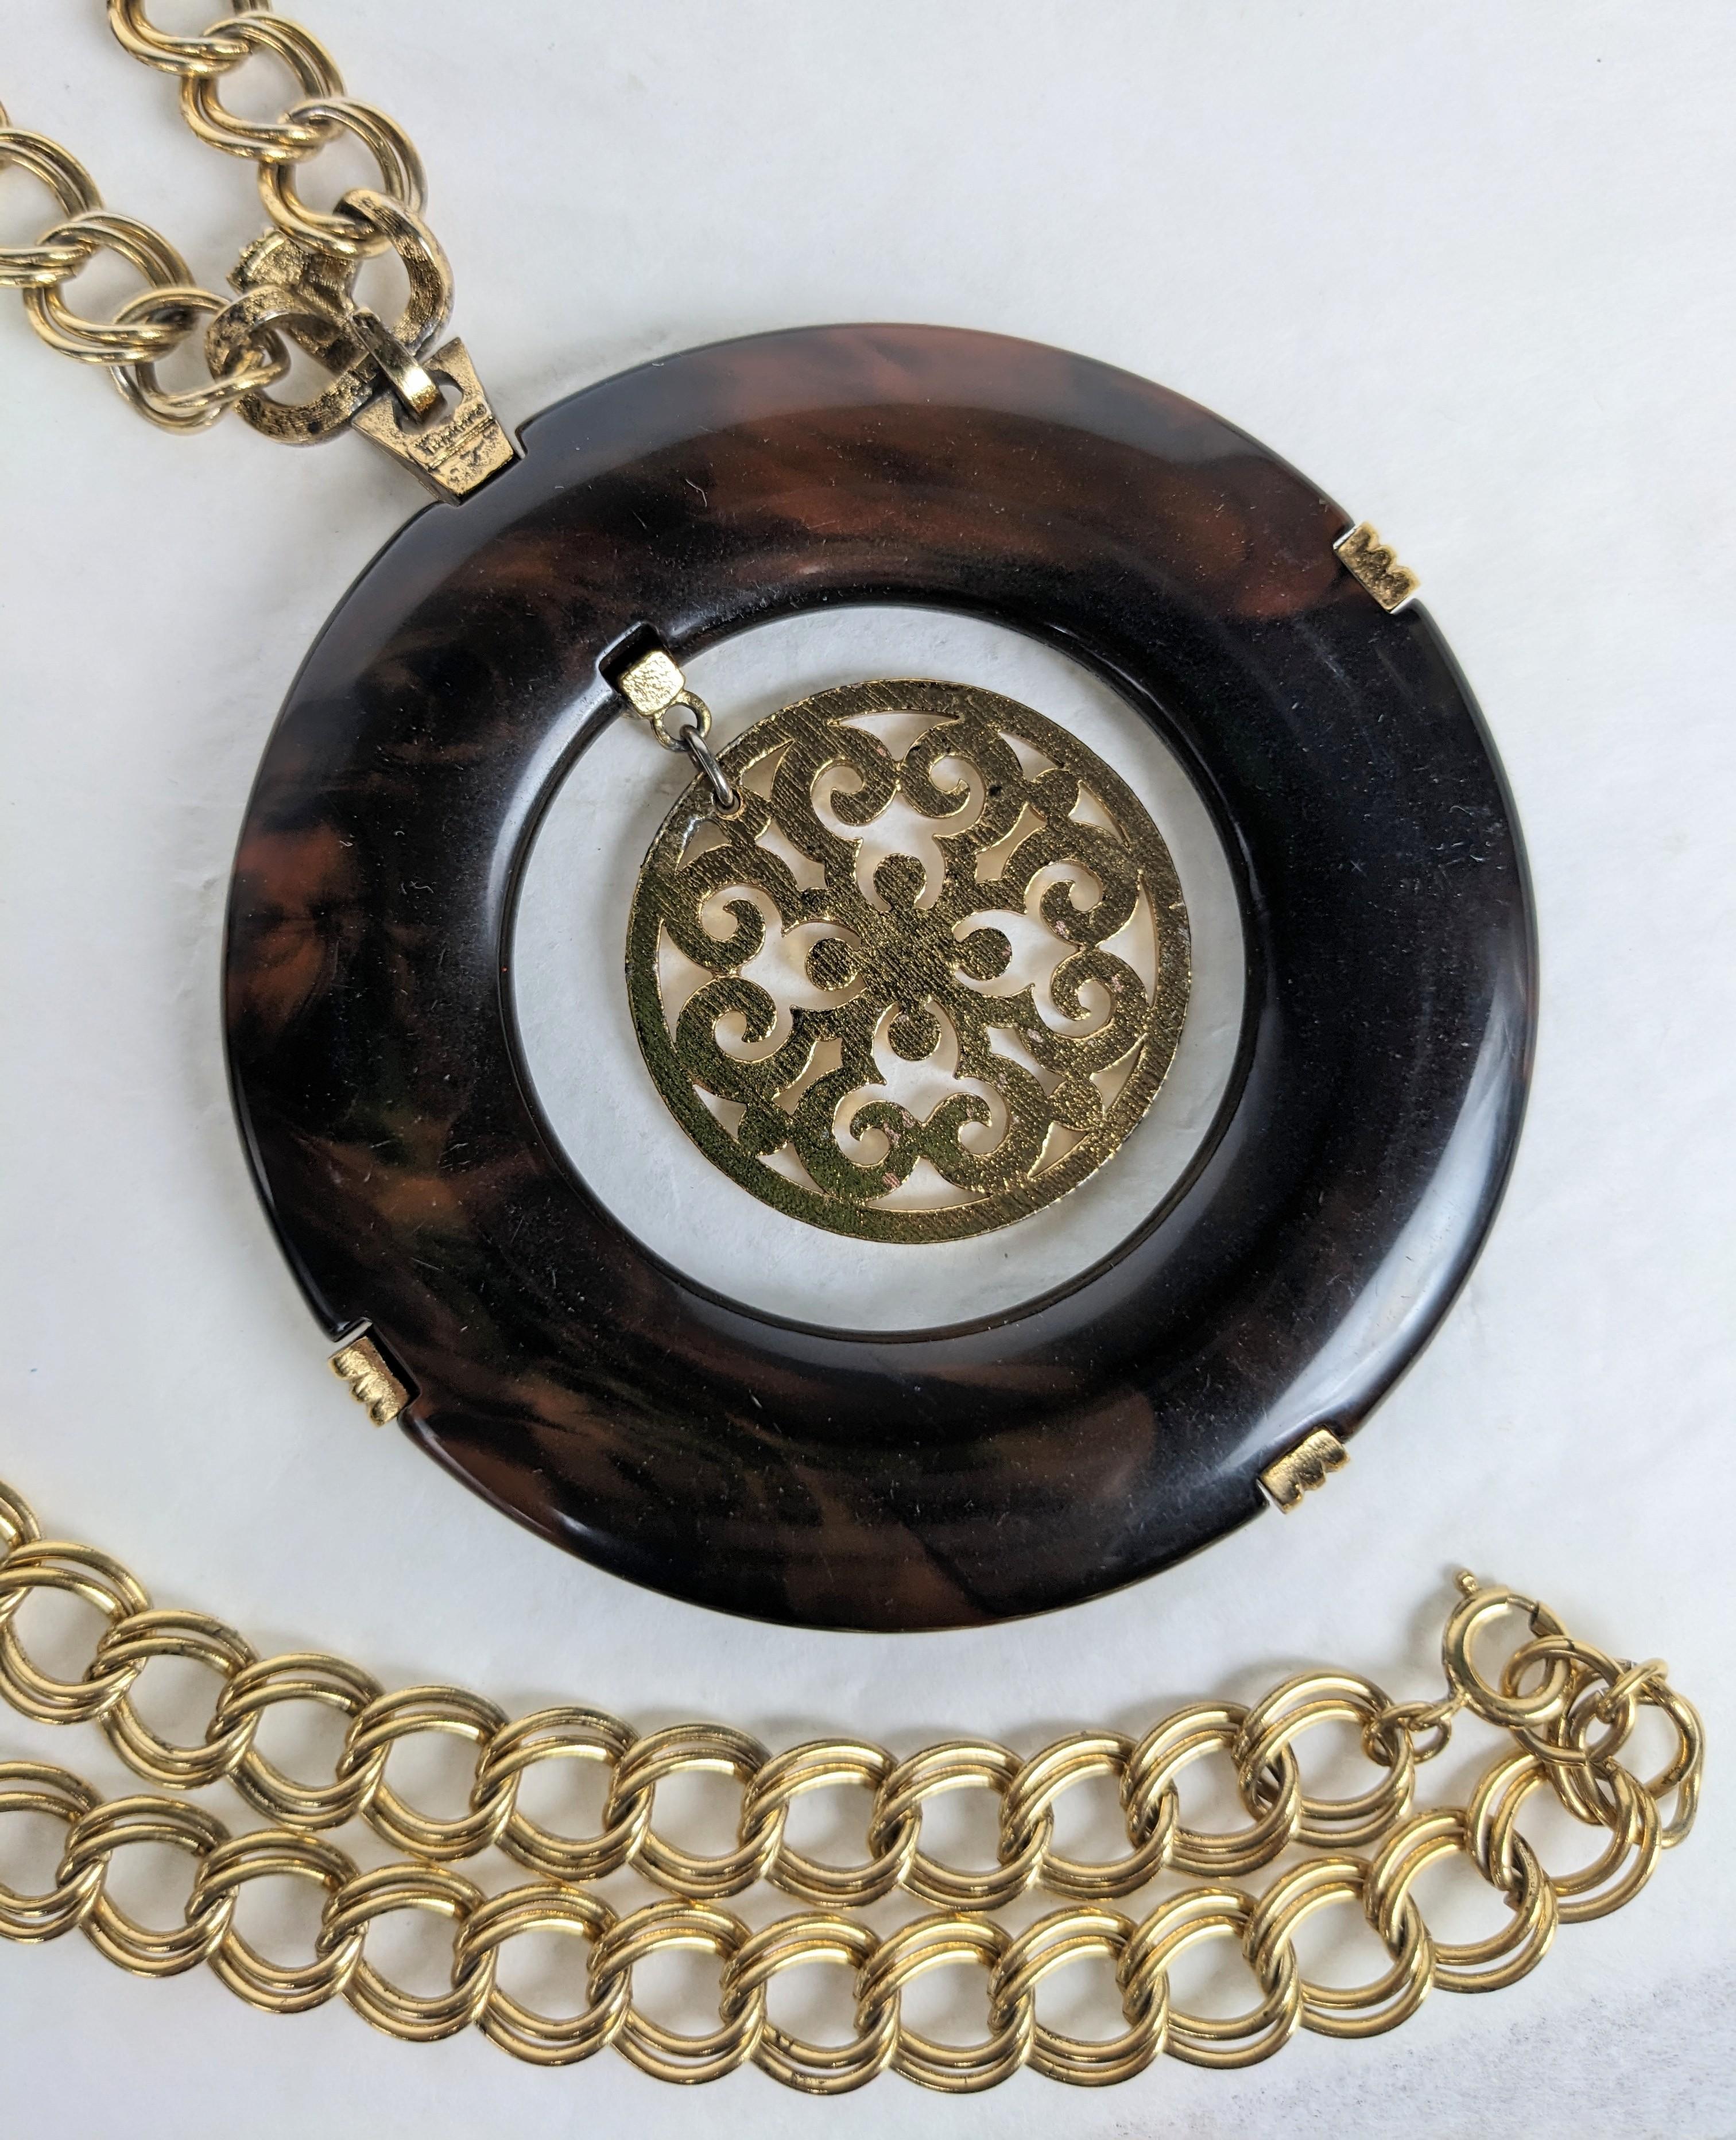 Trifari Faux Tortoise Chnoiserie Mod Pendant In Excellent Condition For Sale In New York, NY